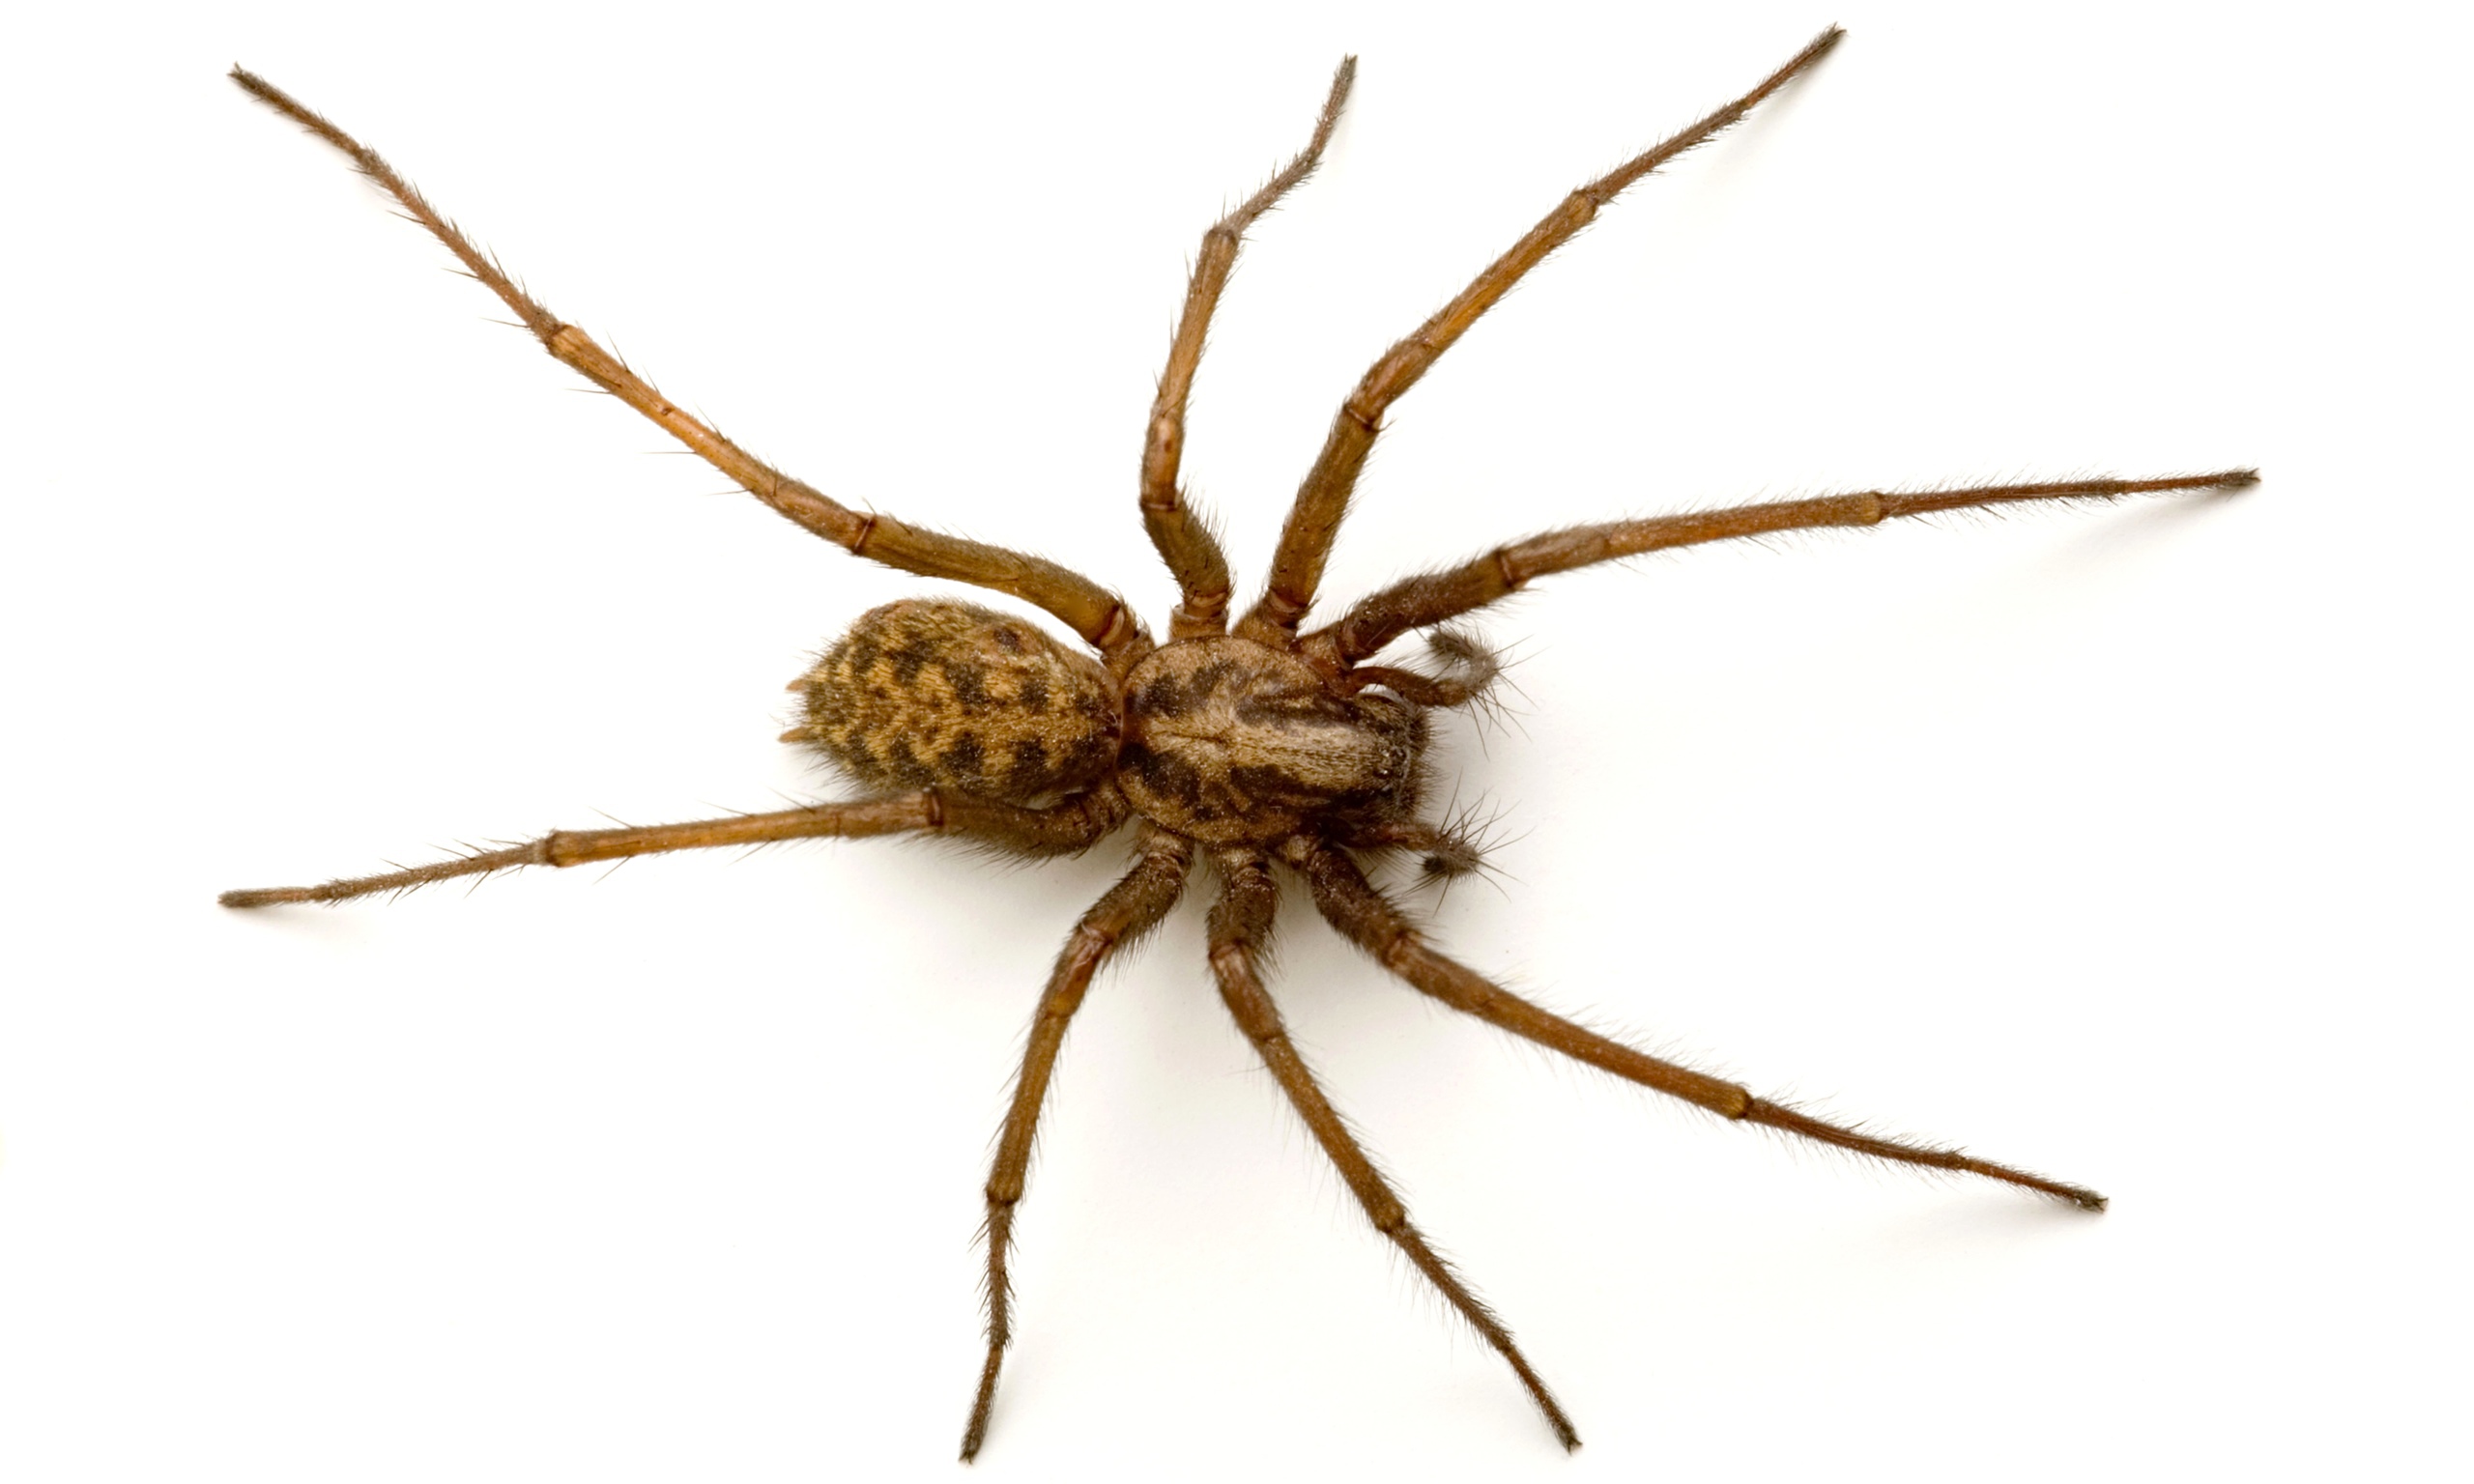 A common phobia is spiders